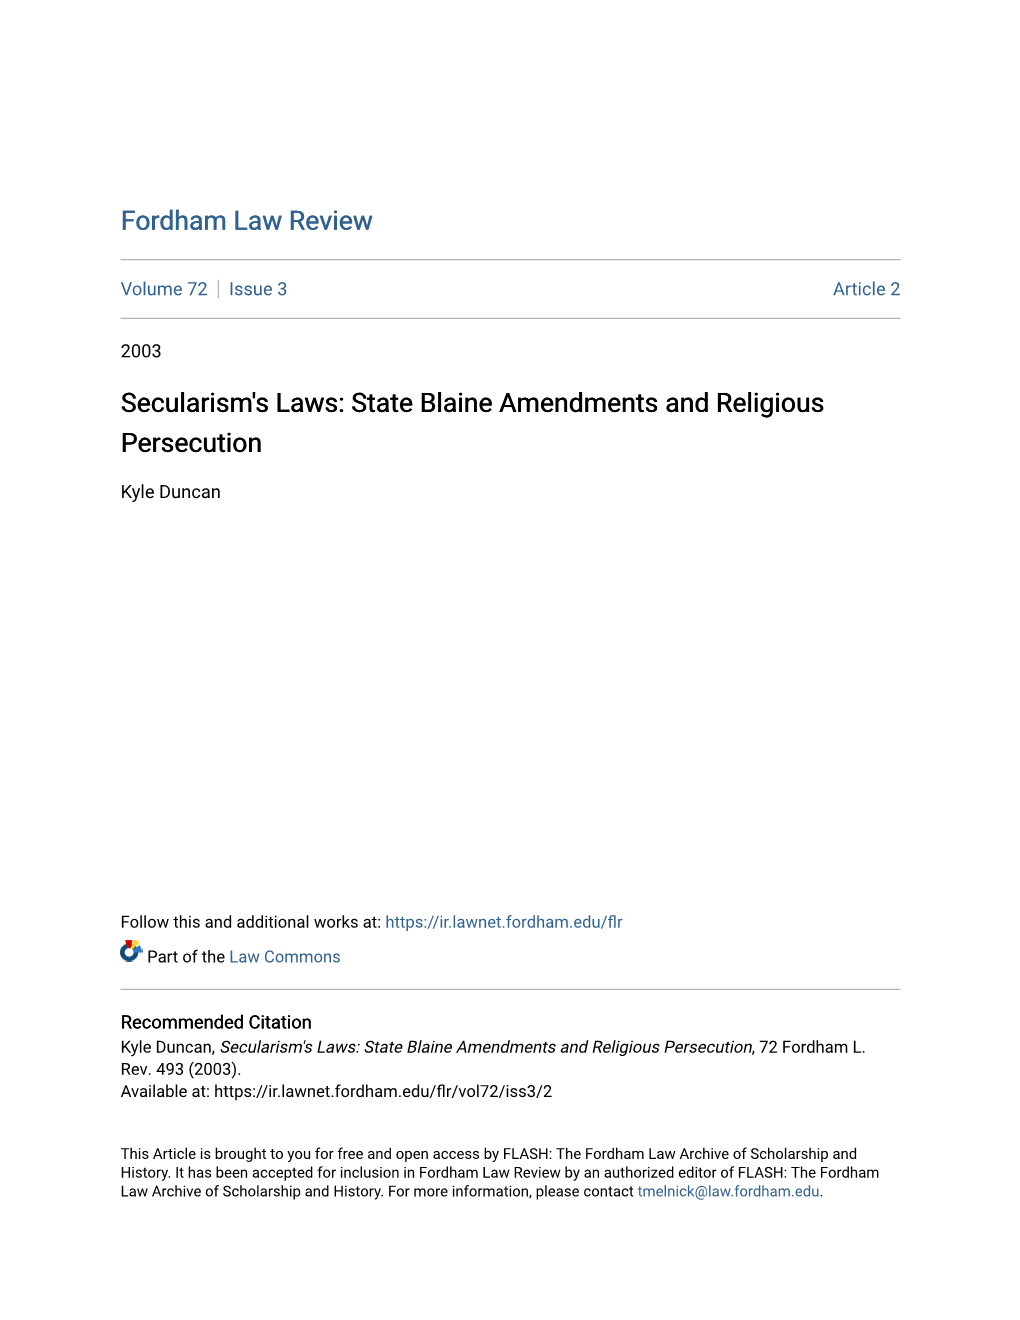 State Blaine Amendments and Religious Persecution